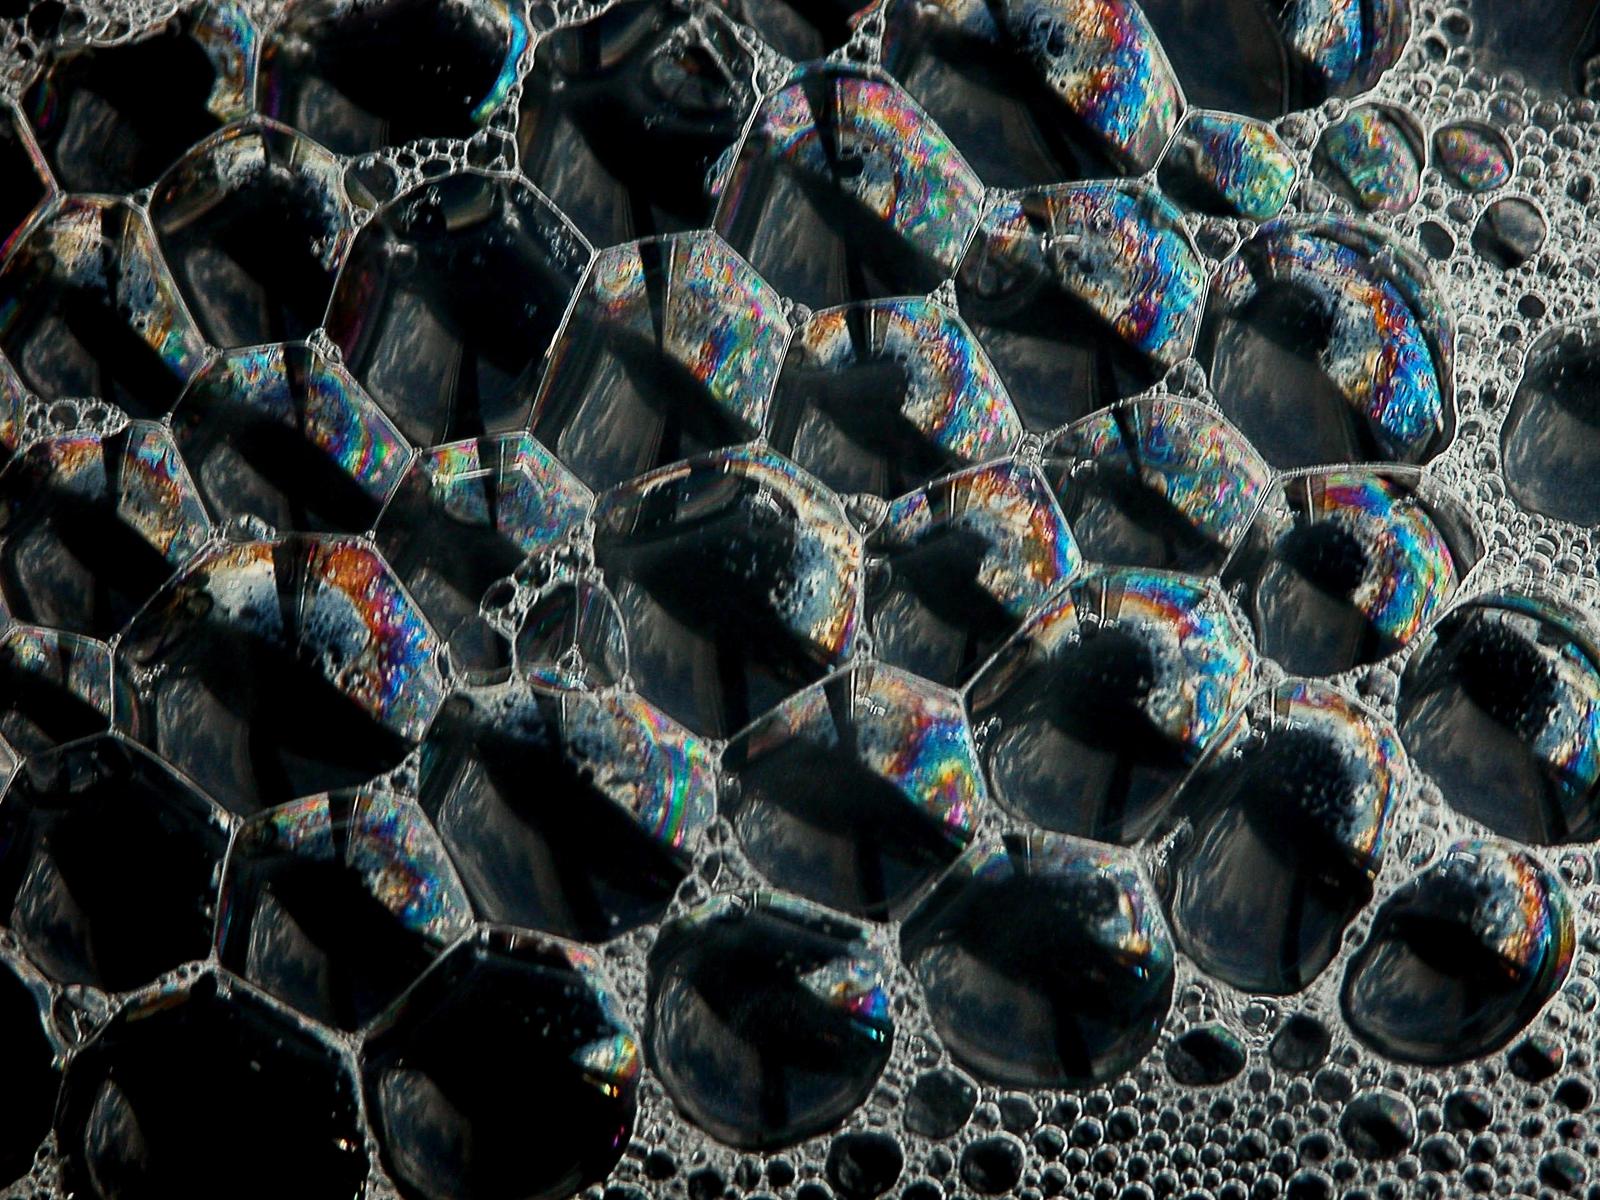 the water droplets are creating an abstract pattern